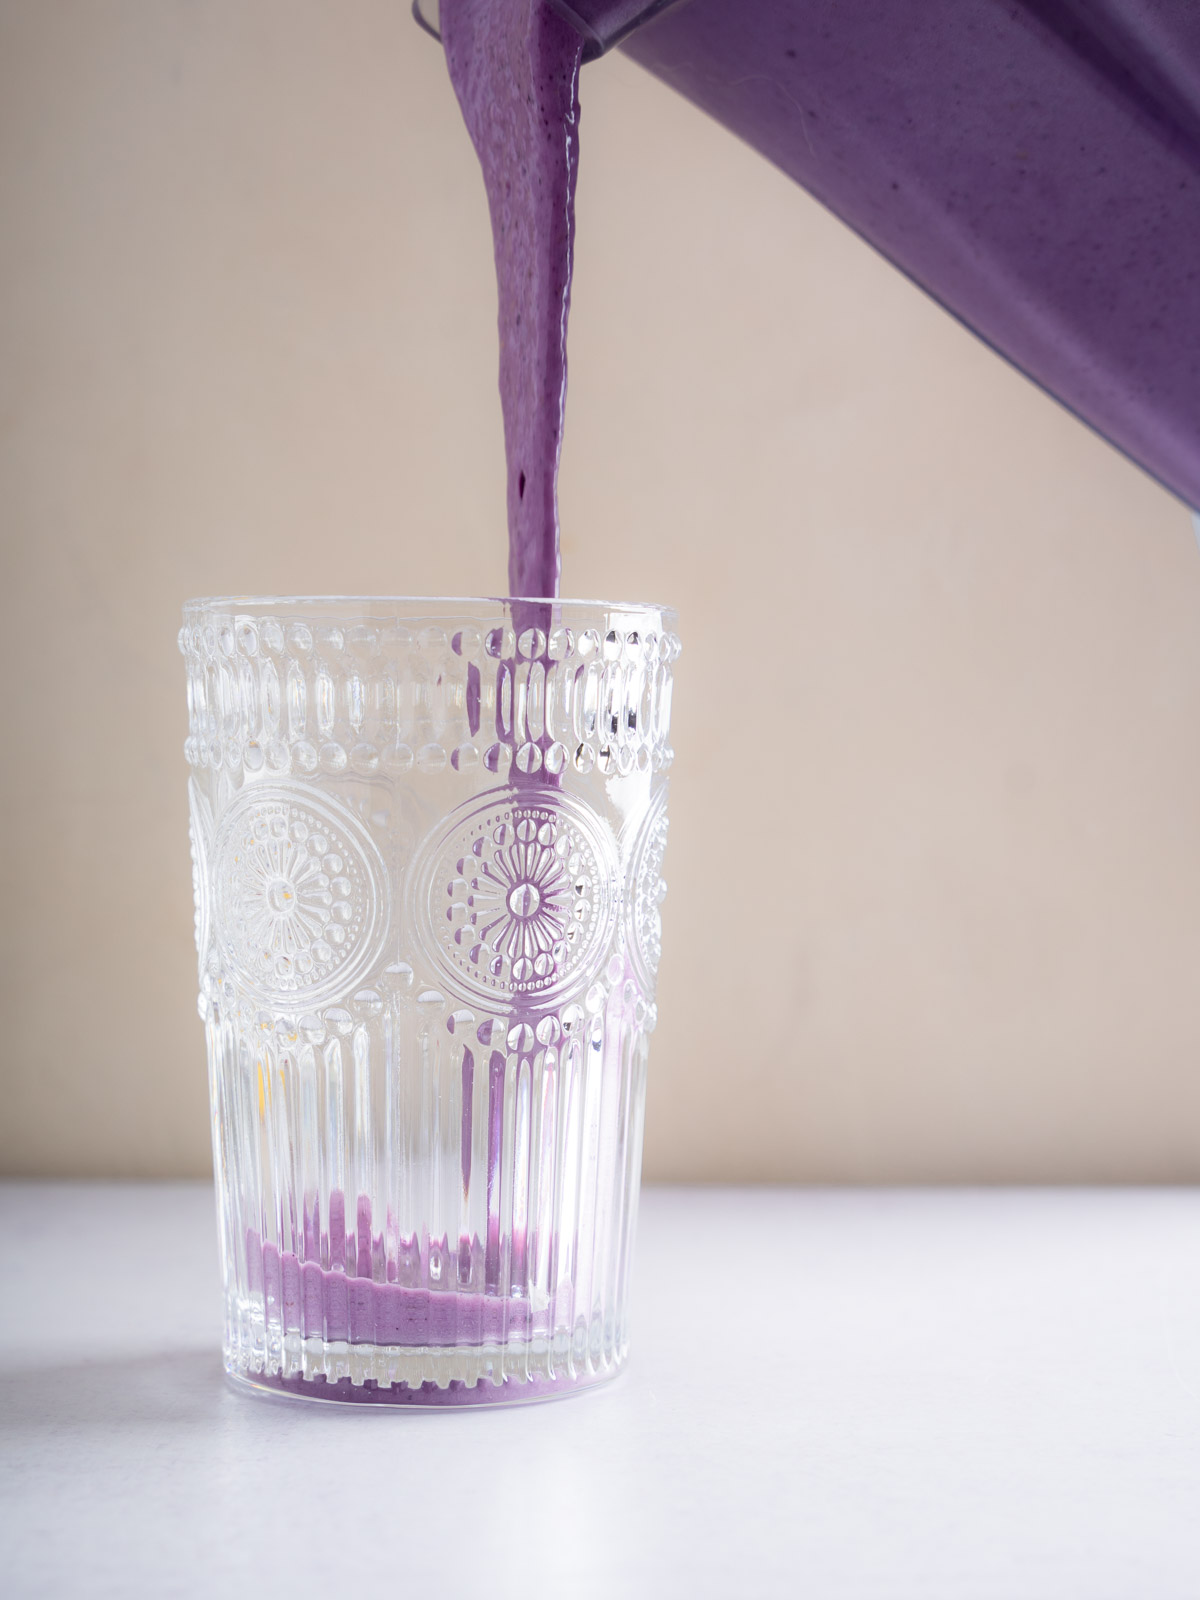 Berry Bliss Smoothie being poured into a decorative glass from a blender. The Berry Blast Smoothie is creamy, with a blue-purple color.